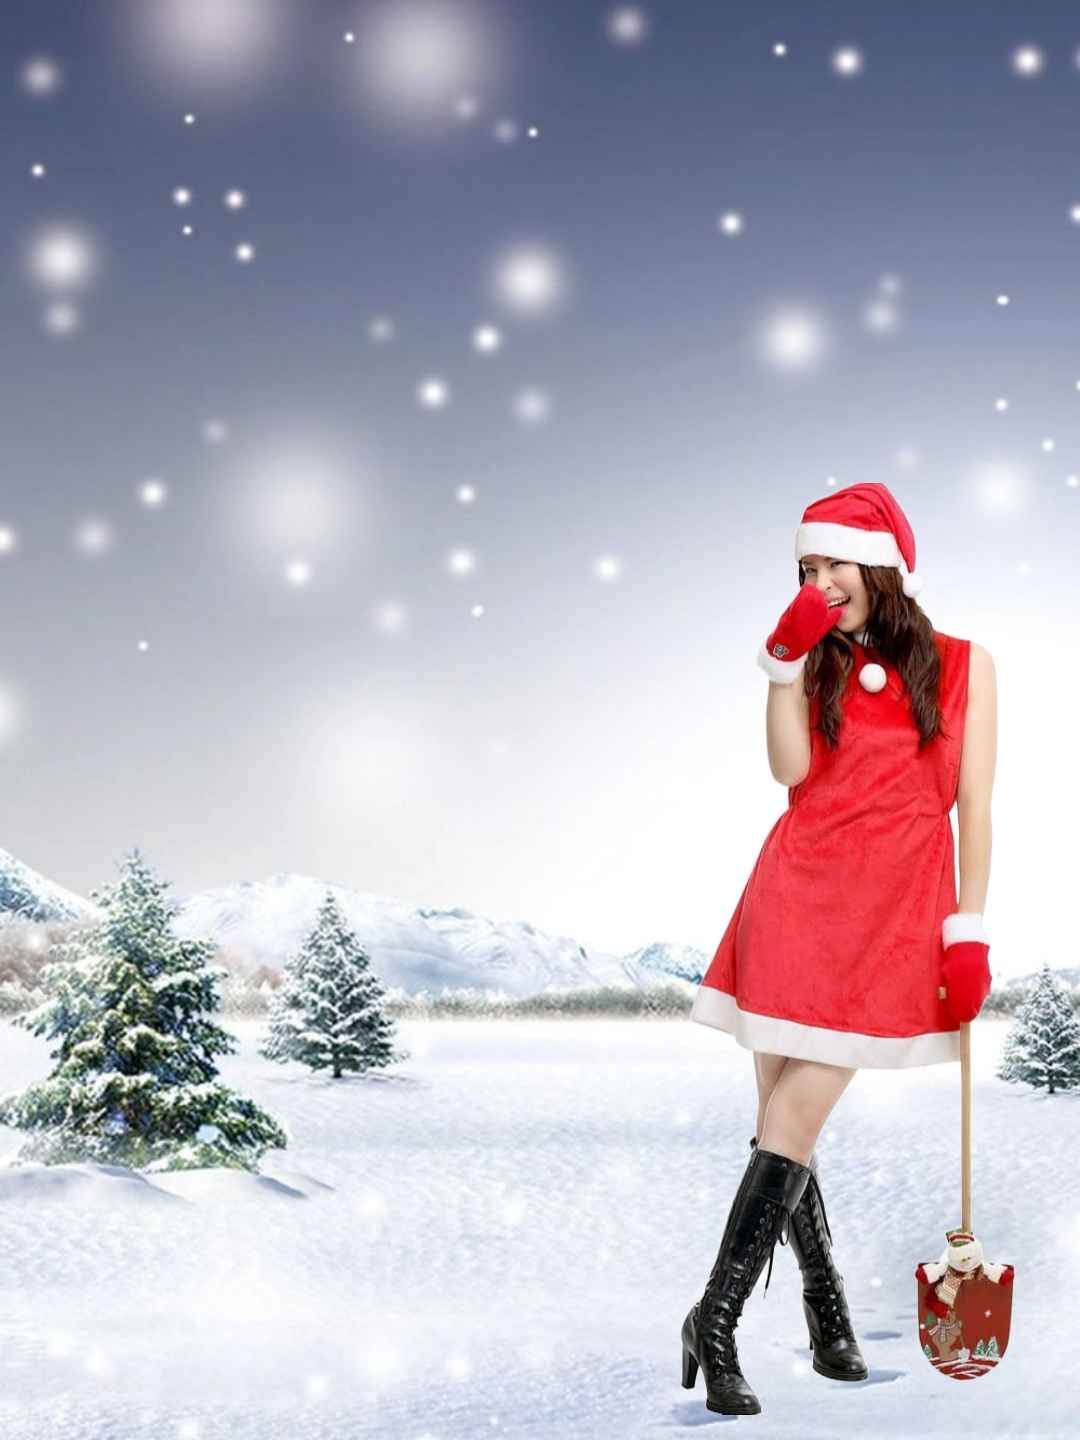 Girl Christmas HD Backgrounds With Girls For Editing